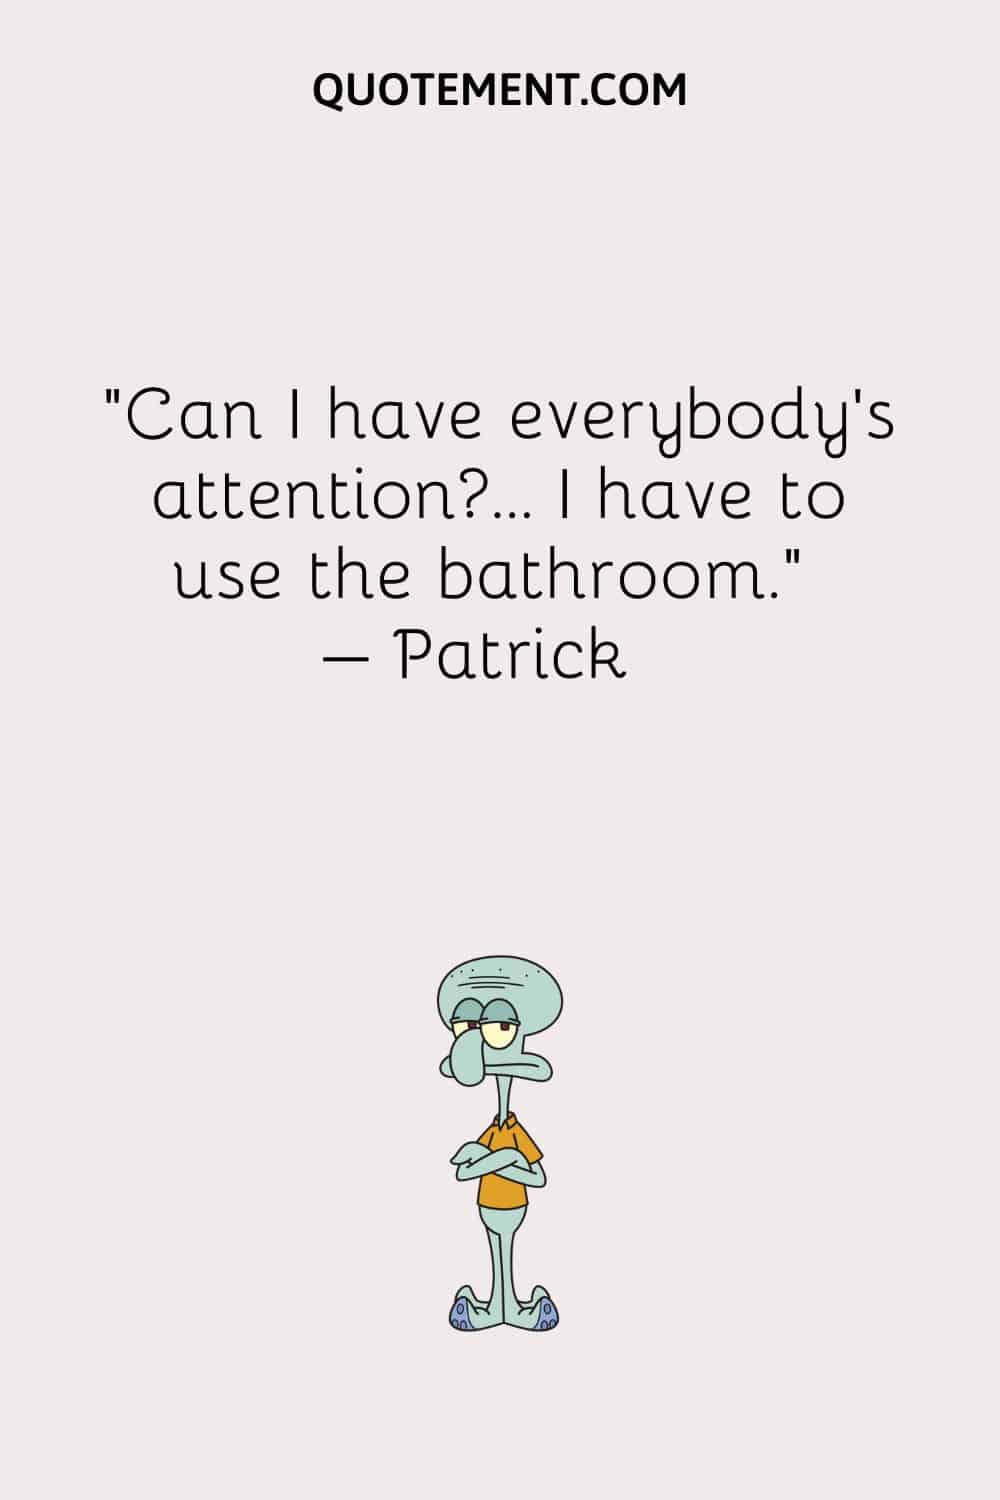 “Can I have everybody’s attention… I have to use the bathroom.” – Patrick
